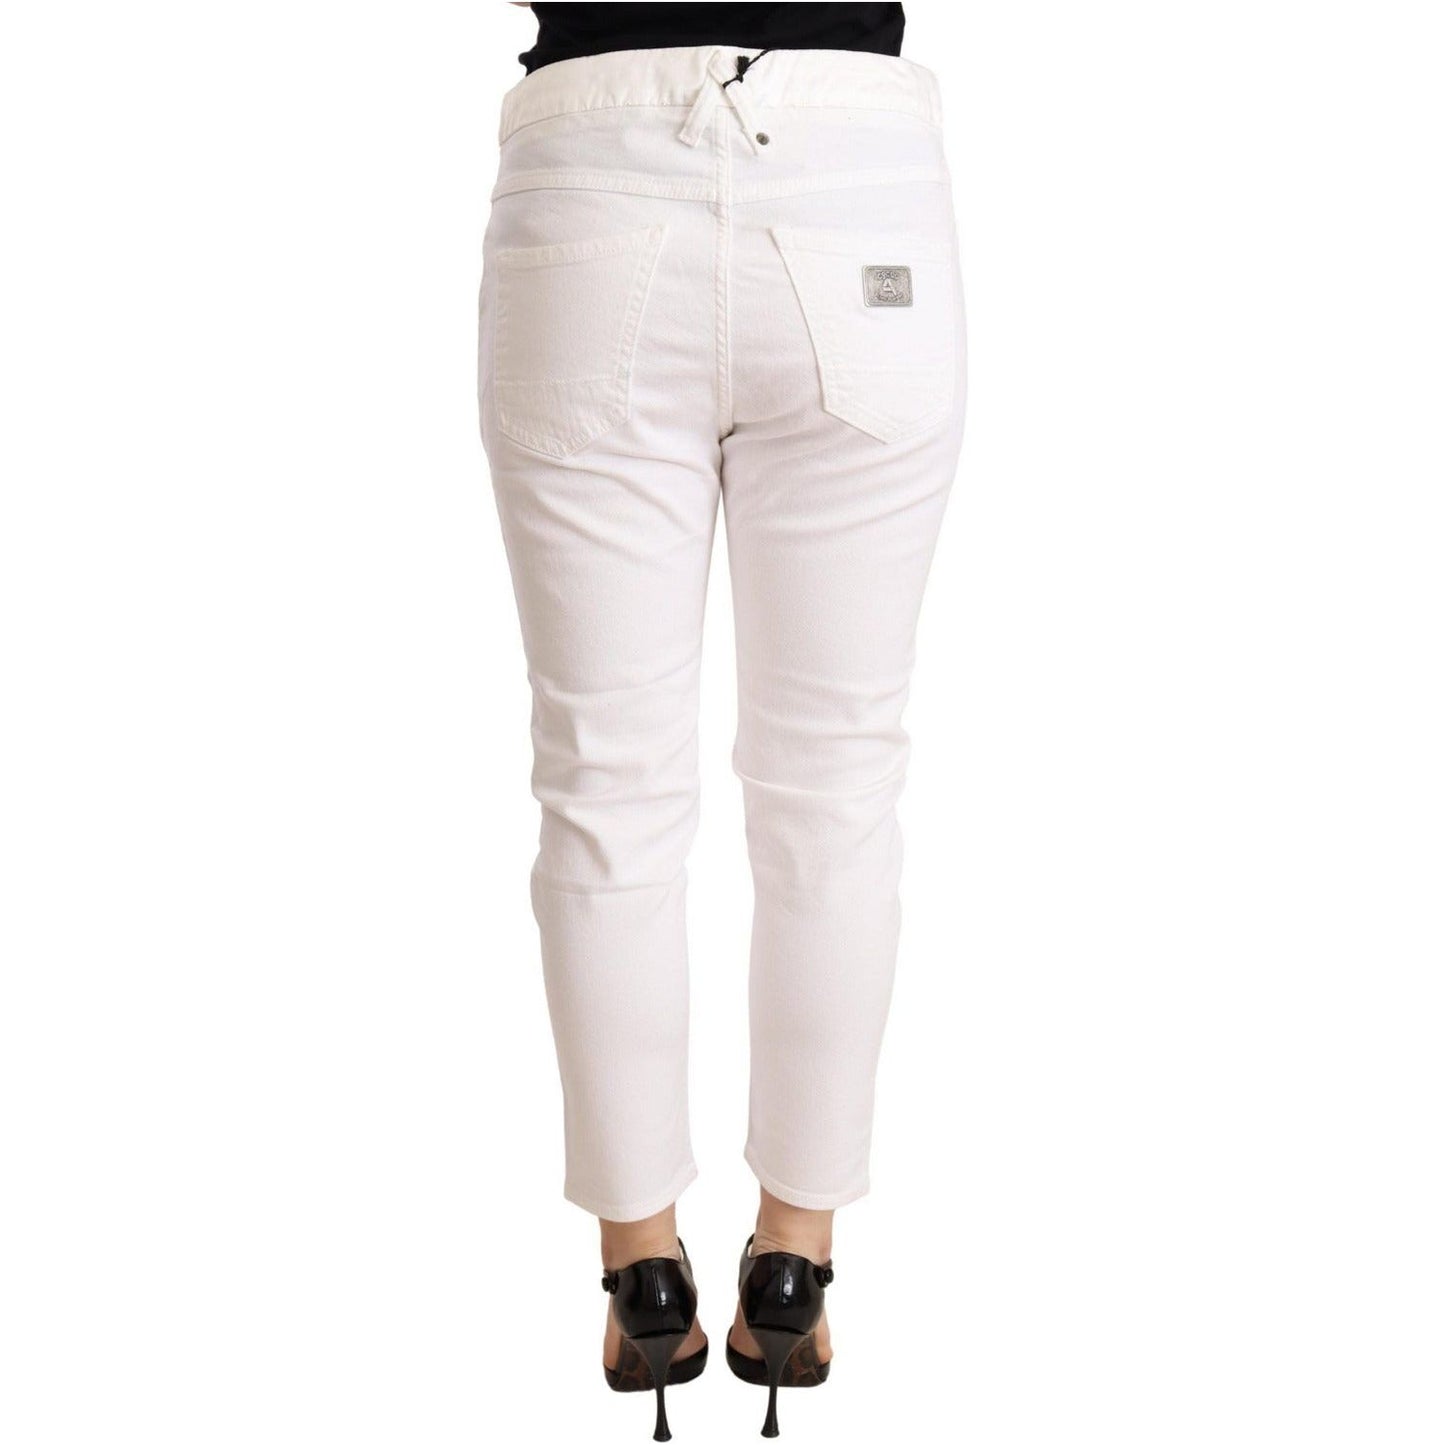 CYCLE | White Mid Waist Slim Fit Skinny Cotton Stretch Trouser | McRichard Designer Brands